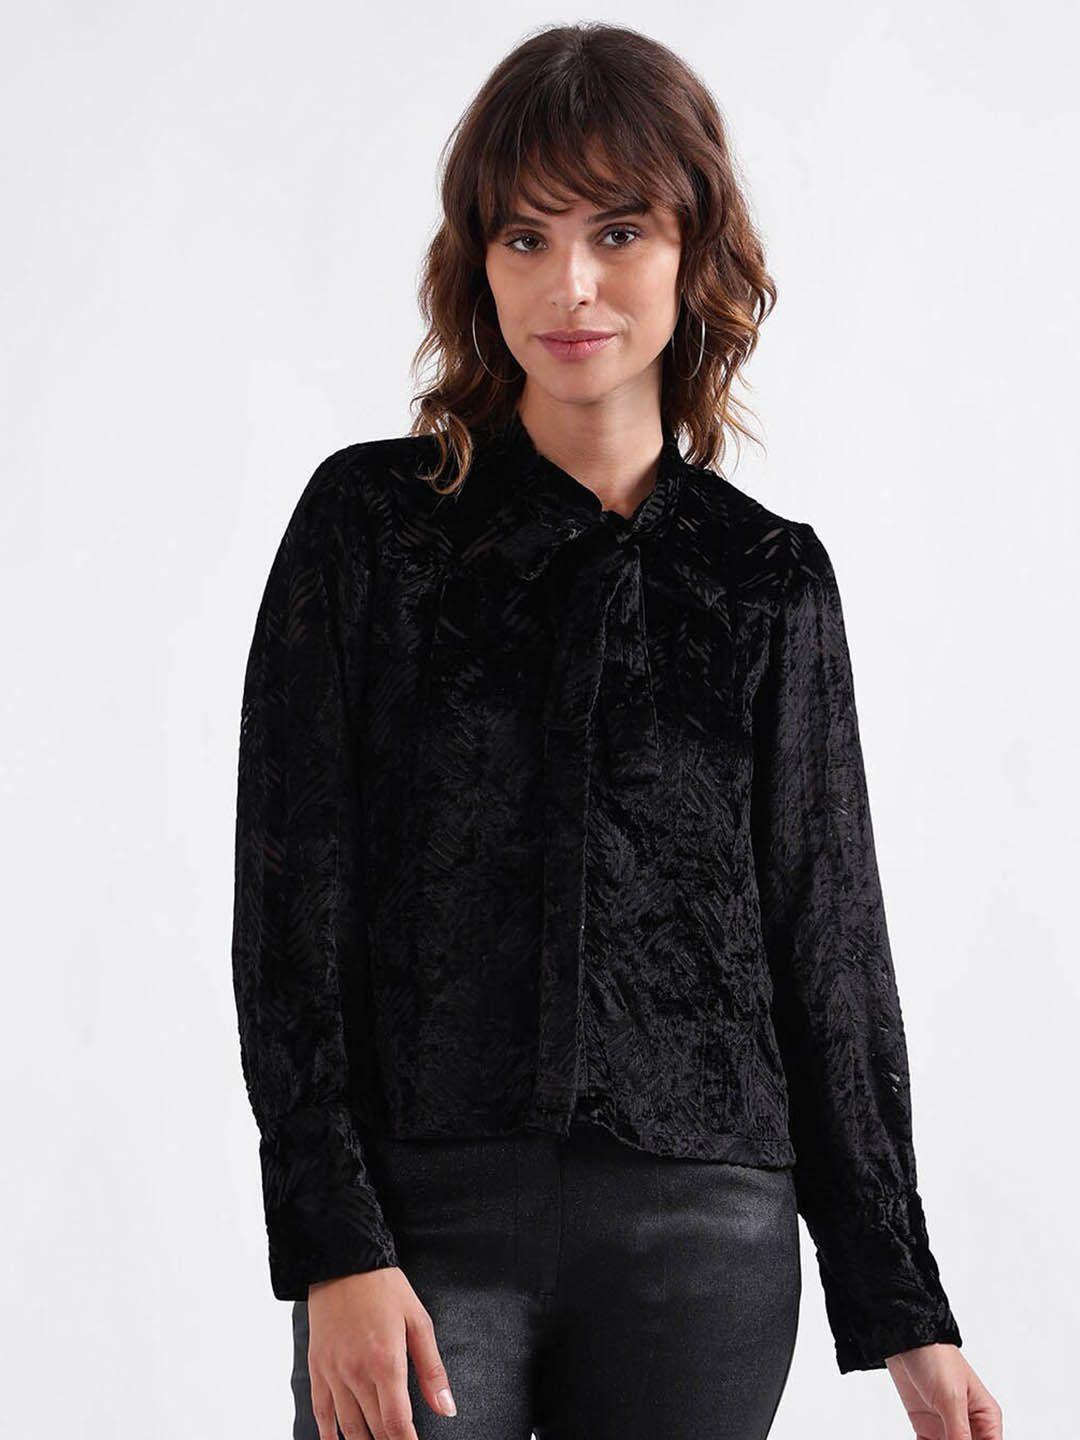 centrestage tie-up neck shirt style top